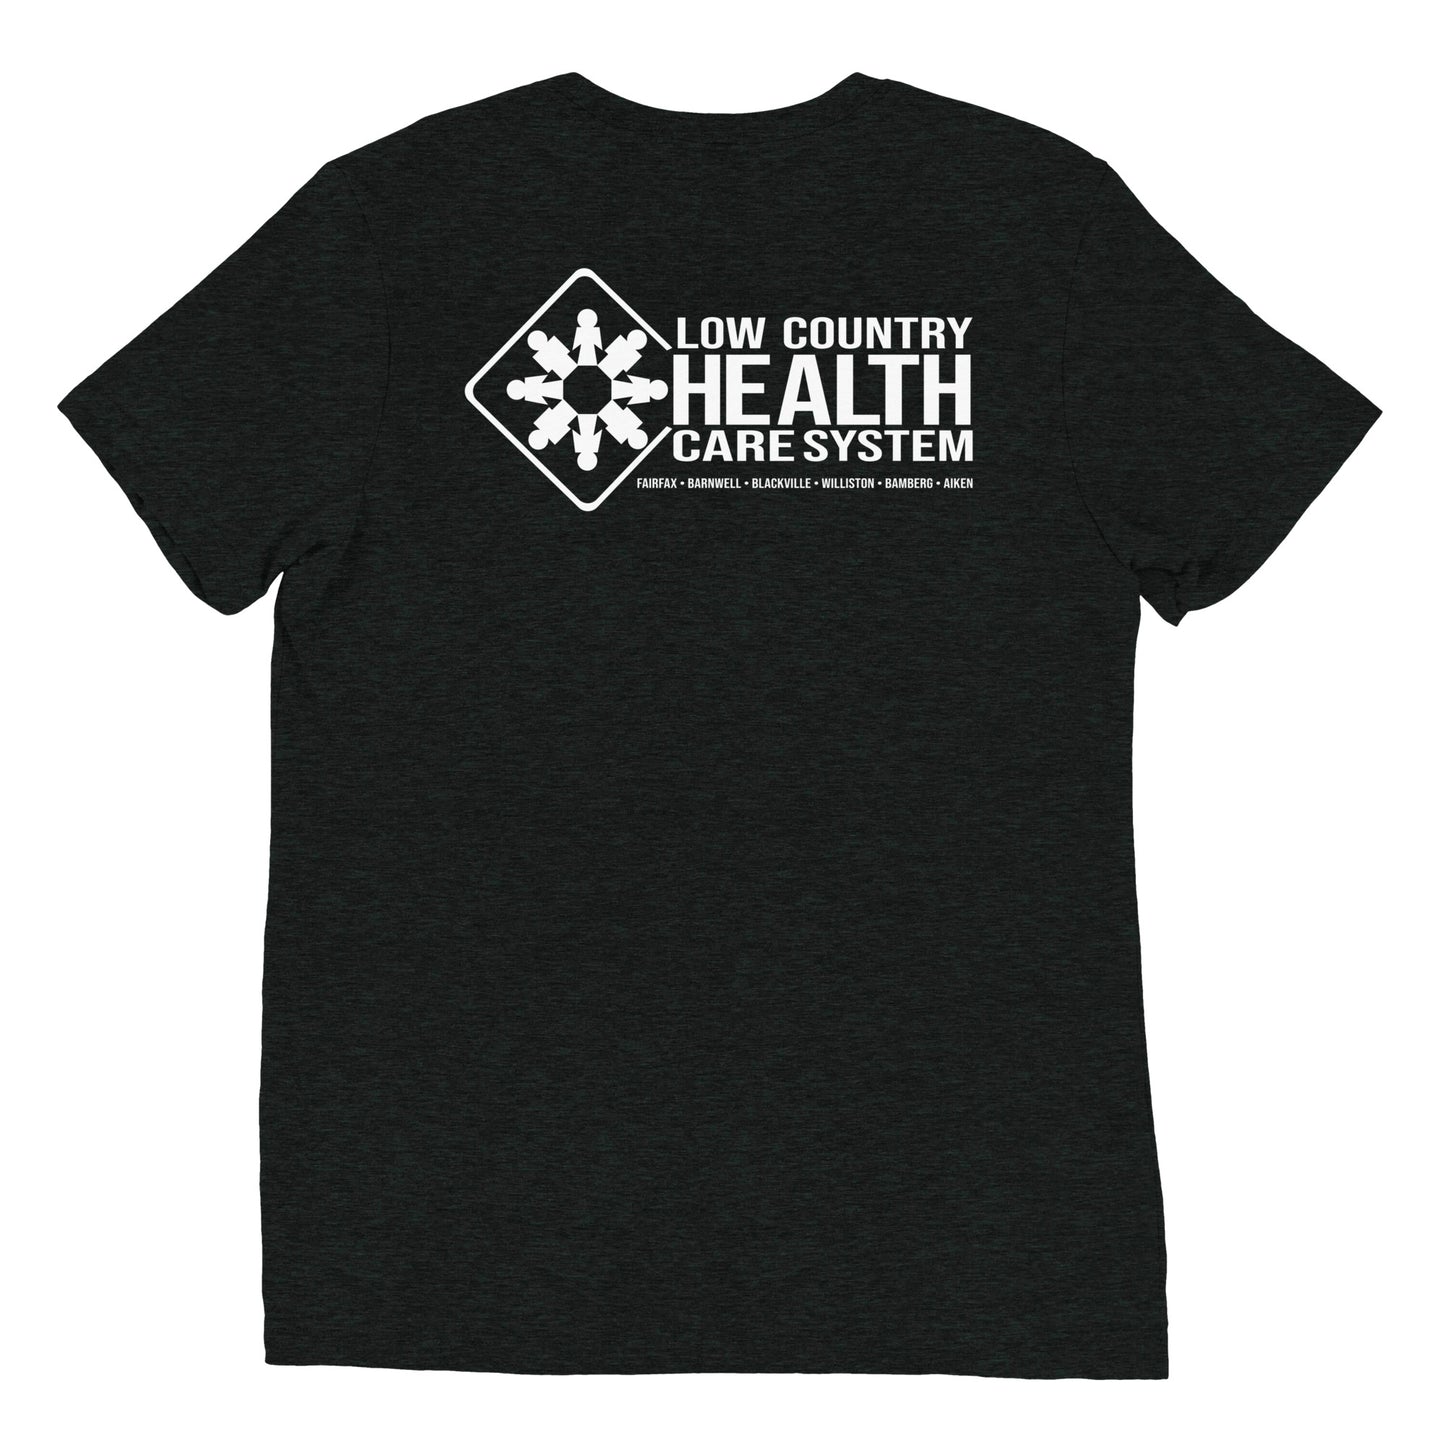 Extra-soft Triblend T-shirt (double sided print)